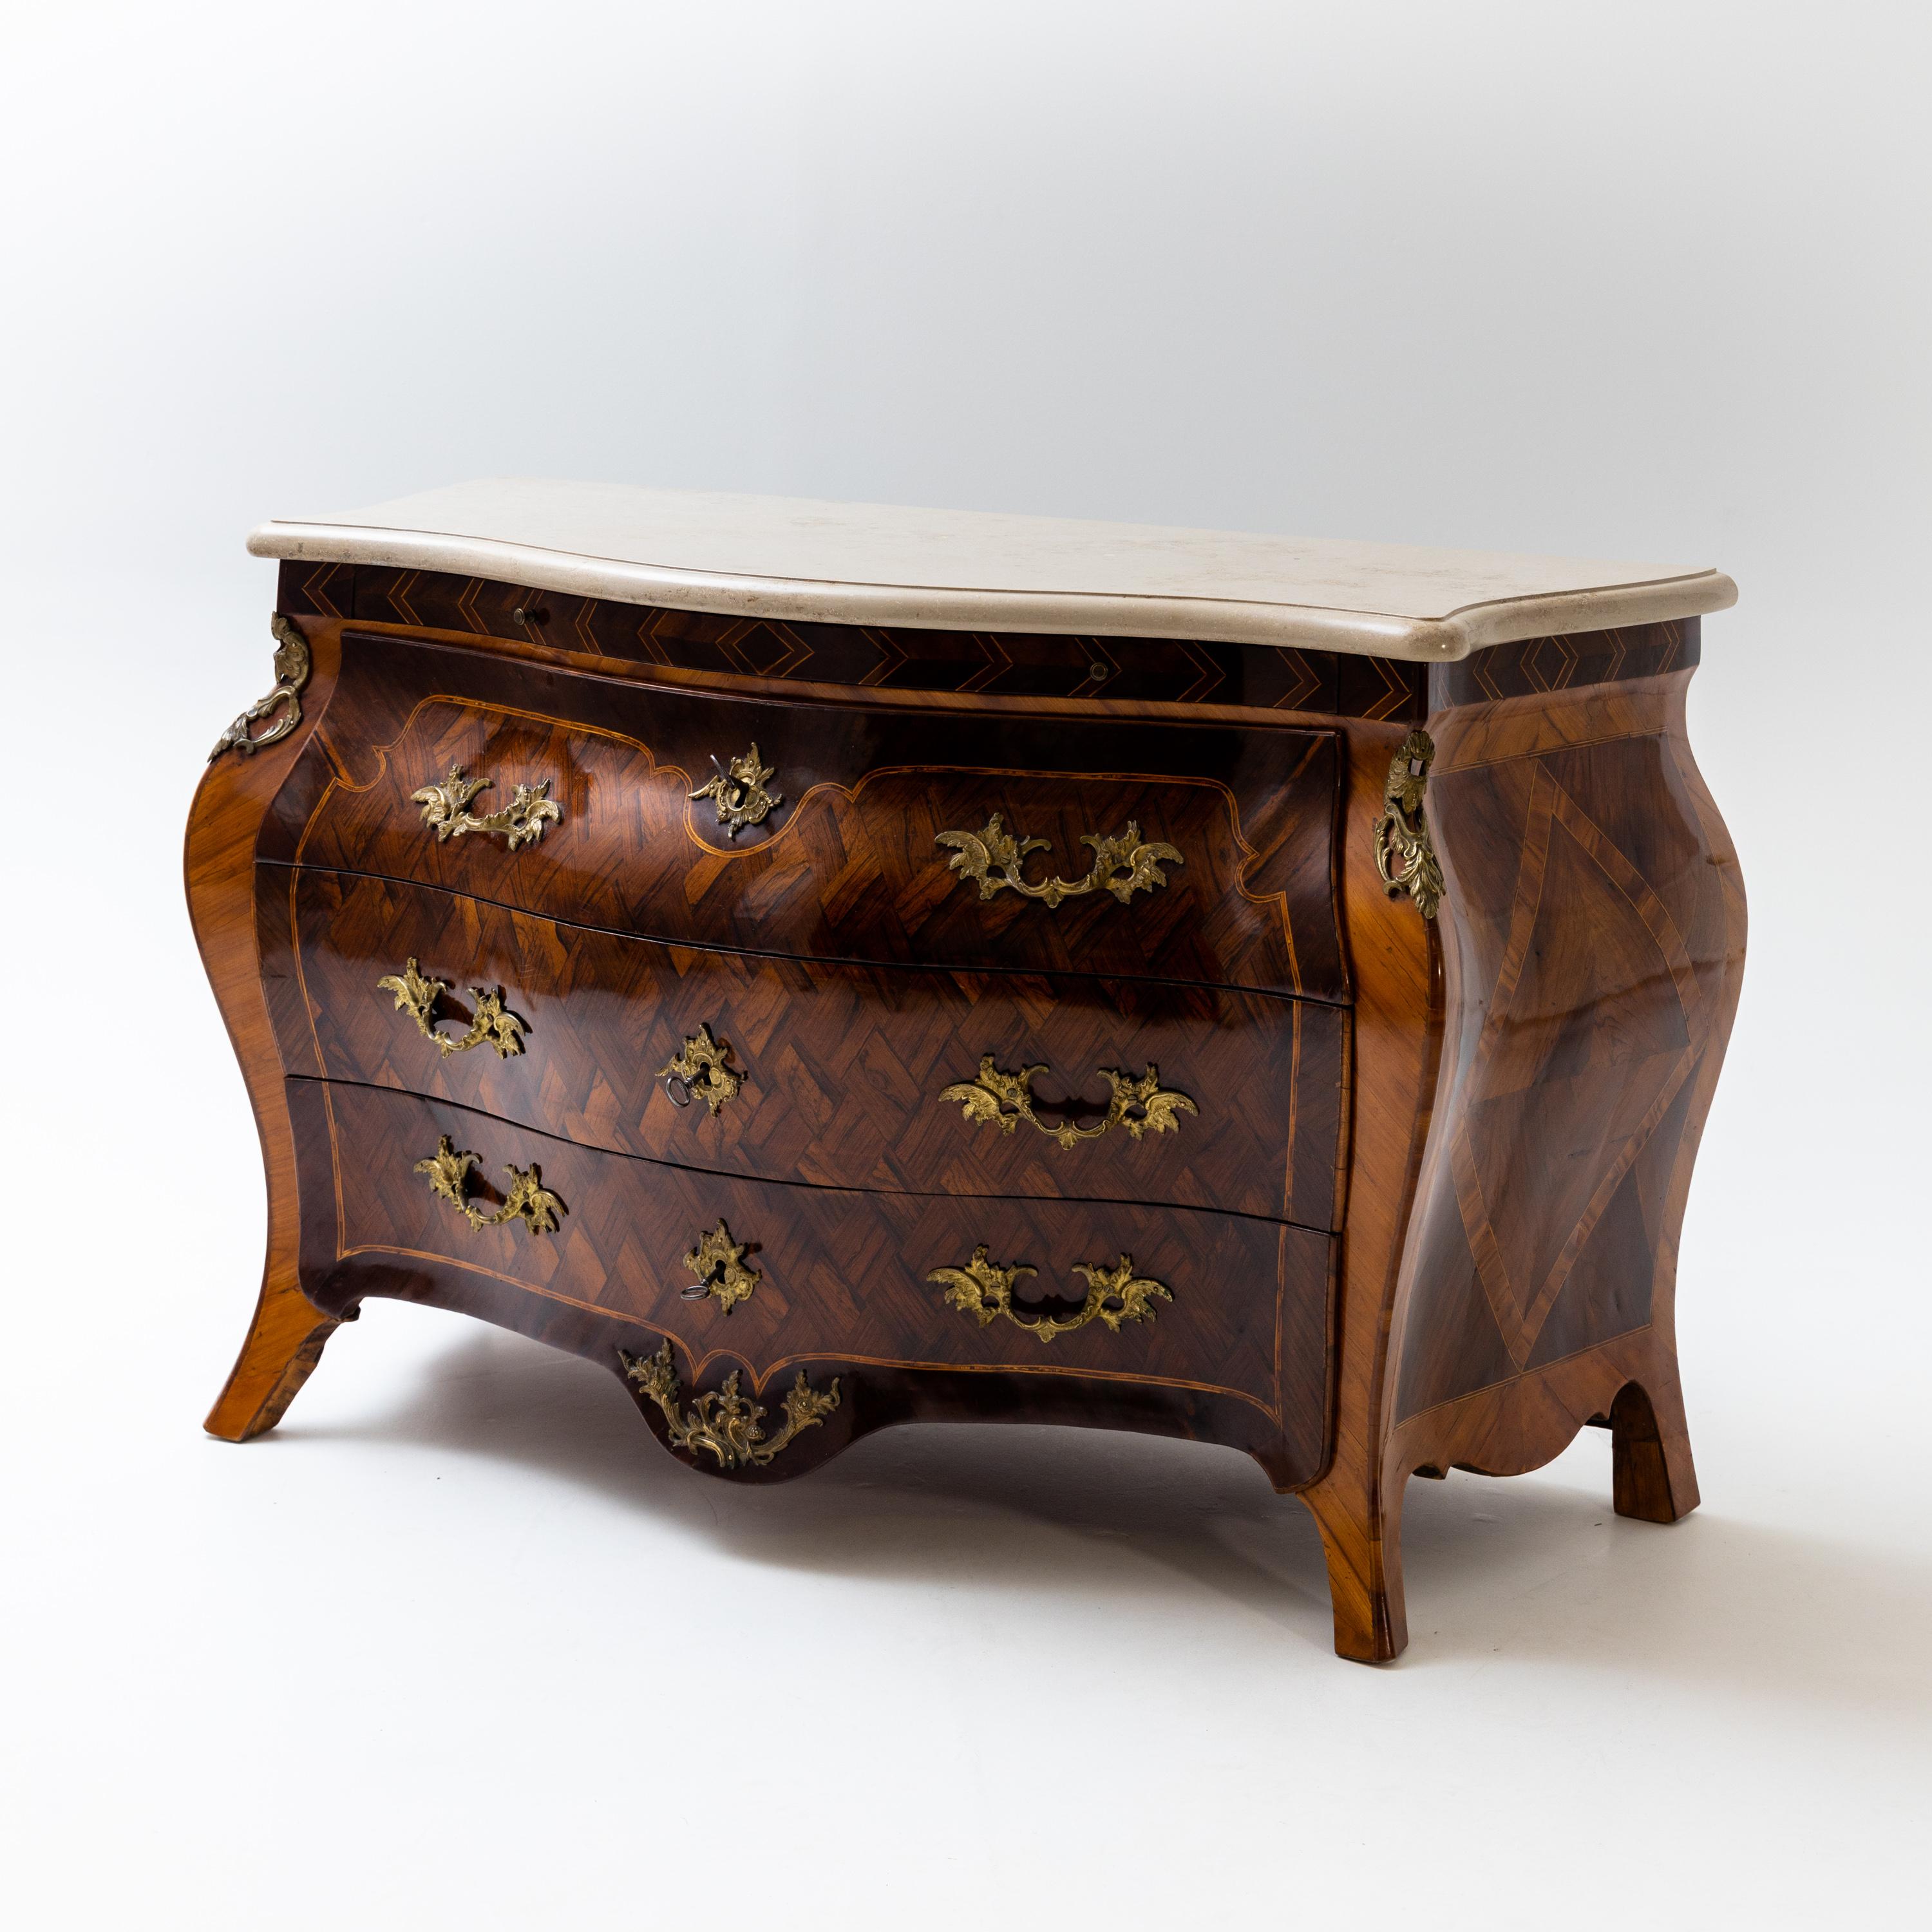 Baroque Chest of Drawers, Niclas Korp, Sweden, c. 1775 For Sale 1